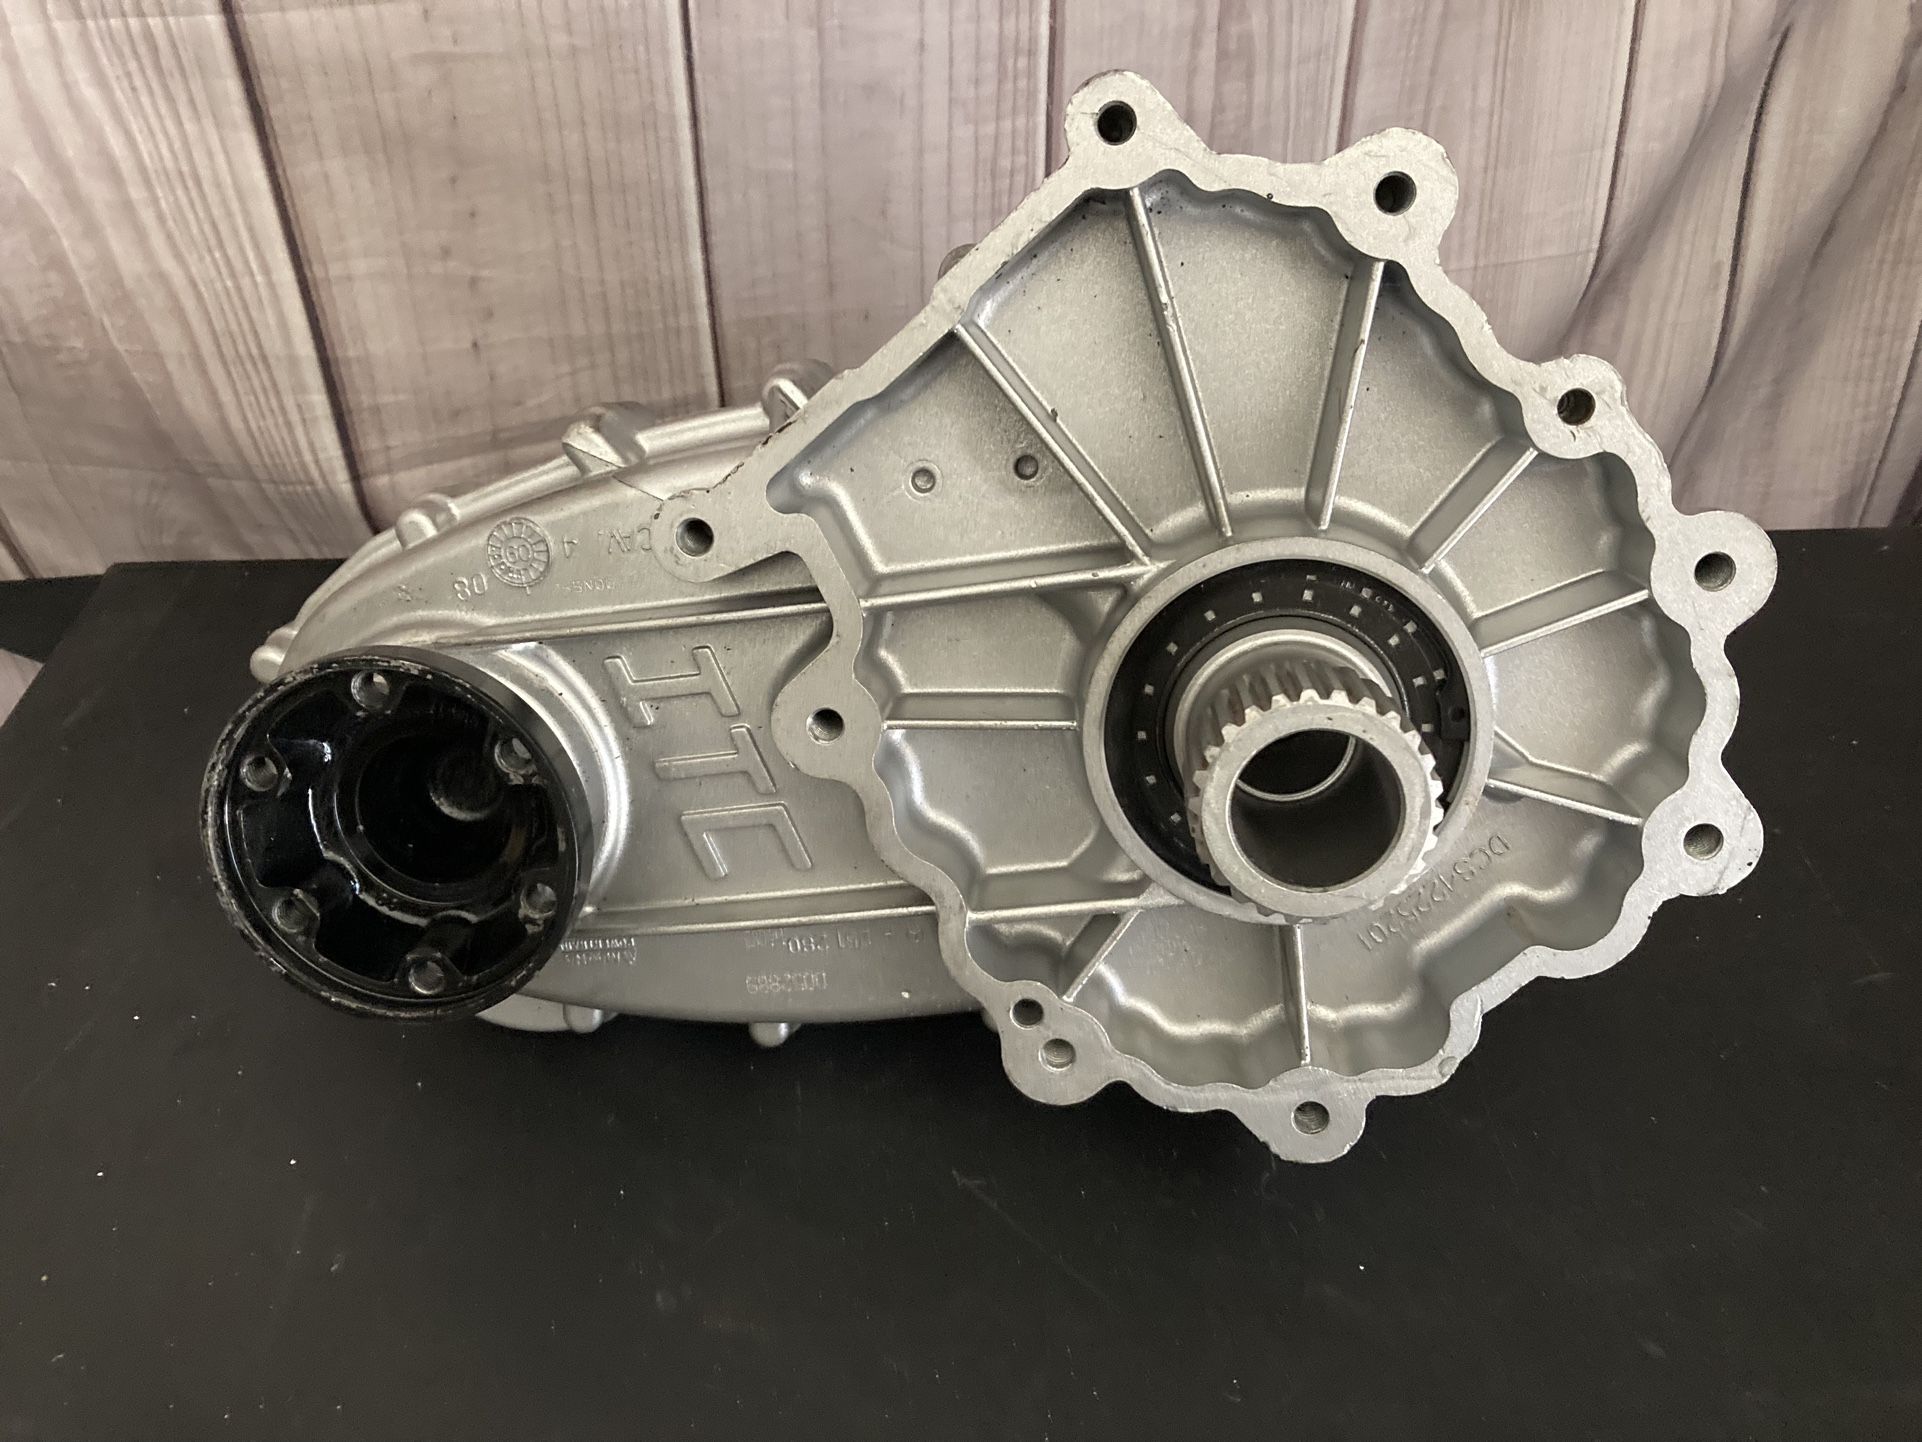 Transfer Case Assembly, (contact info removed) For Mercedes Benz ML350 ML550 GL550 GL450 R350 Transfer Case Assy Replacement